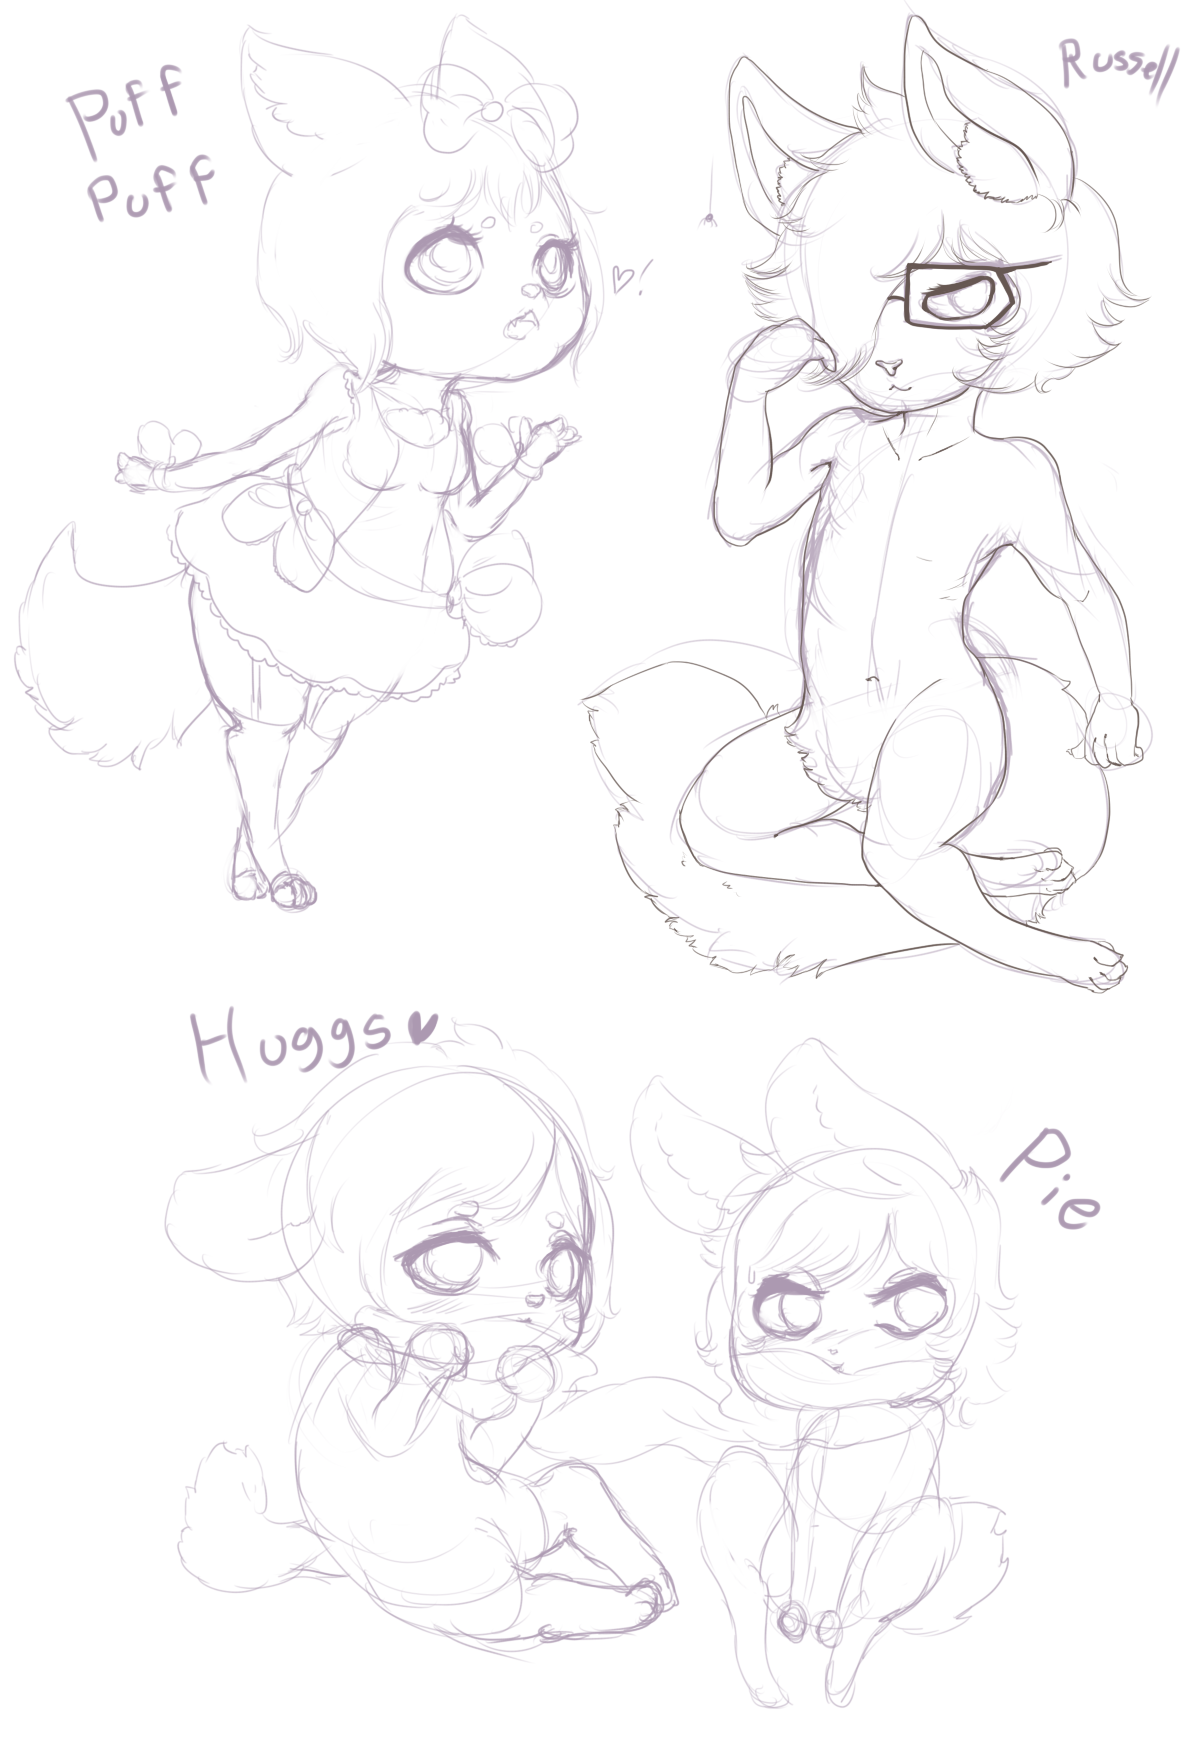 Old Anthro Doodles